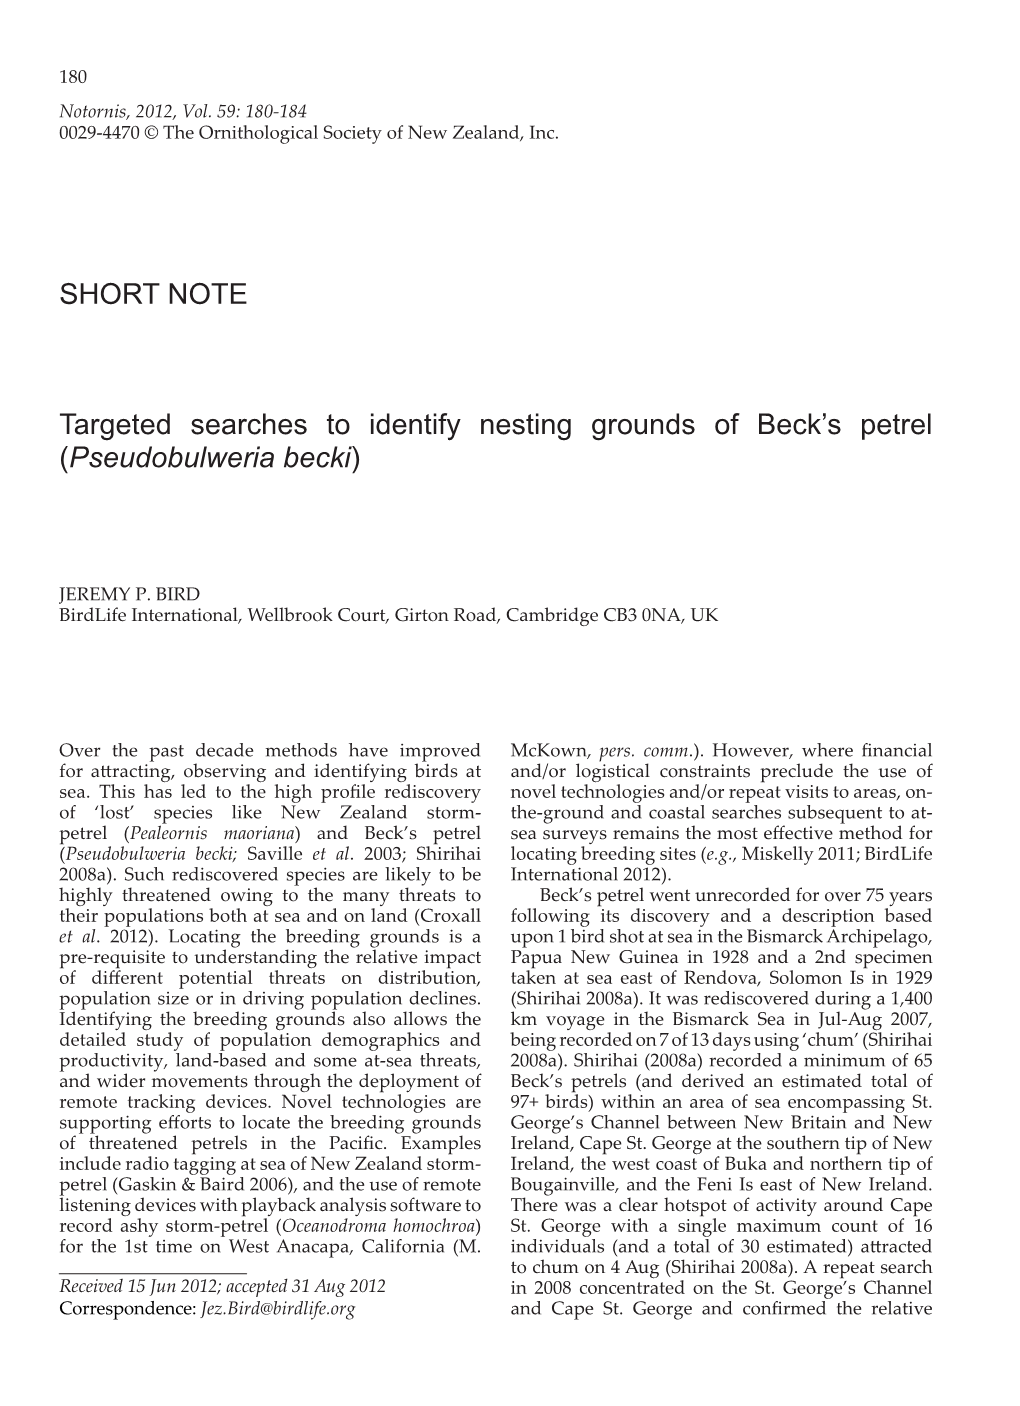 SHORT NOTE Targeted Searches to Identify Nesting Grounds of Beck's Petrel (Pseudobulweria Becki)